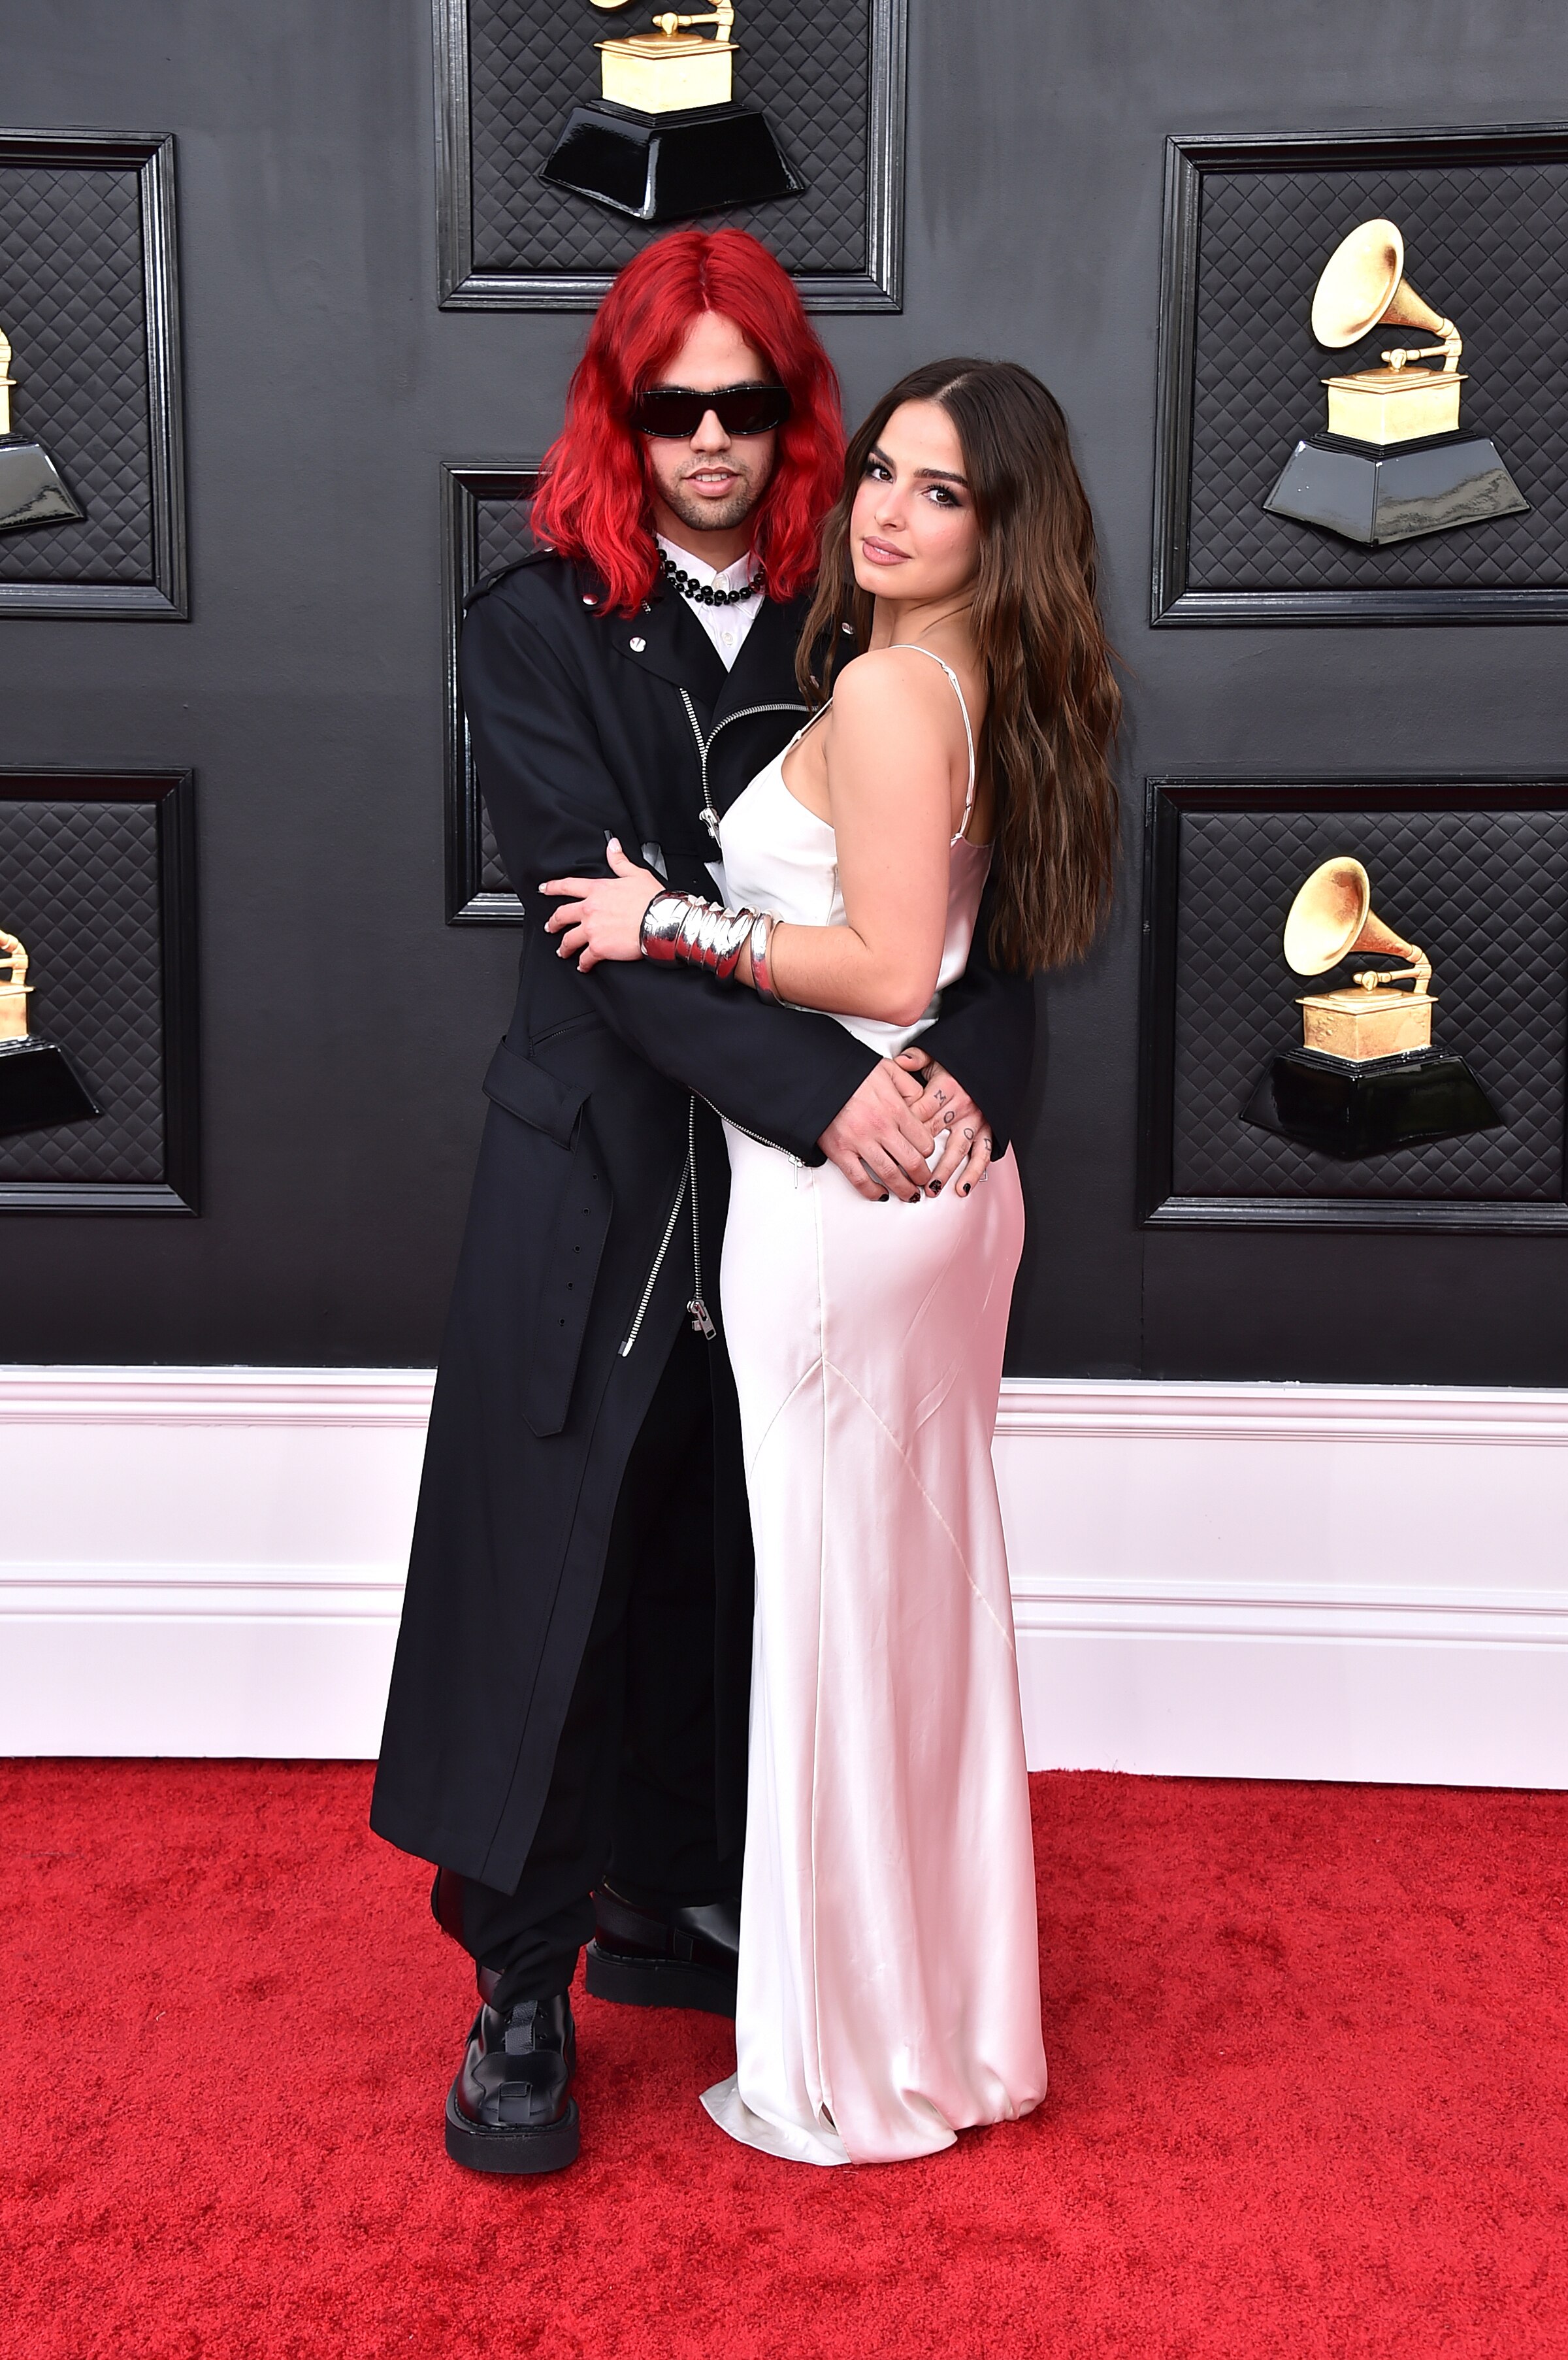 omer fedi and addison rae hug on the grammys red carpet. omer has bright red shoulder-length hair